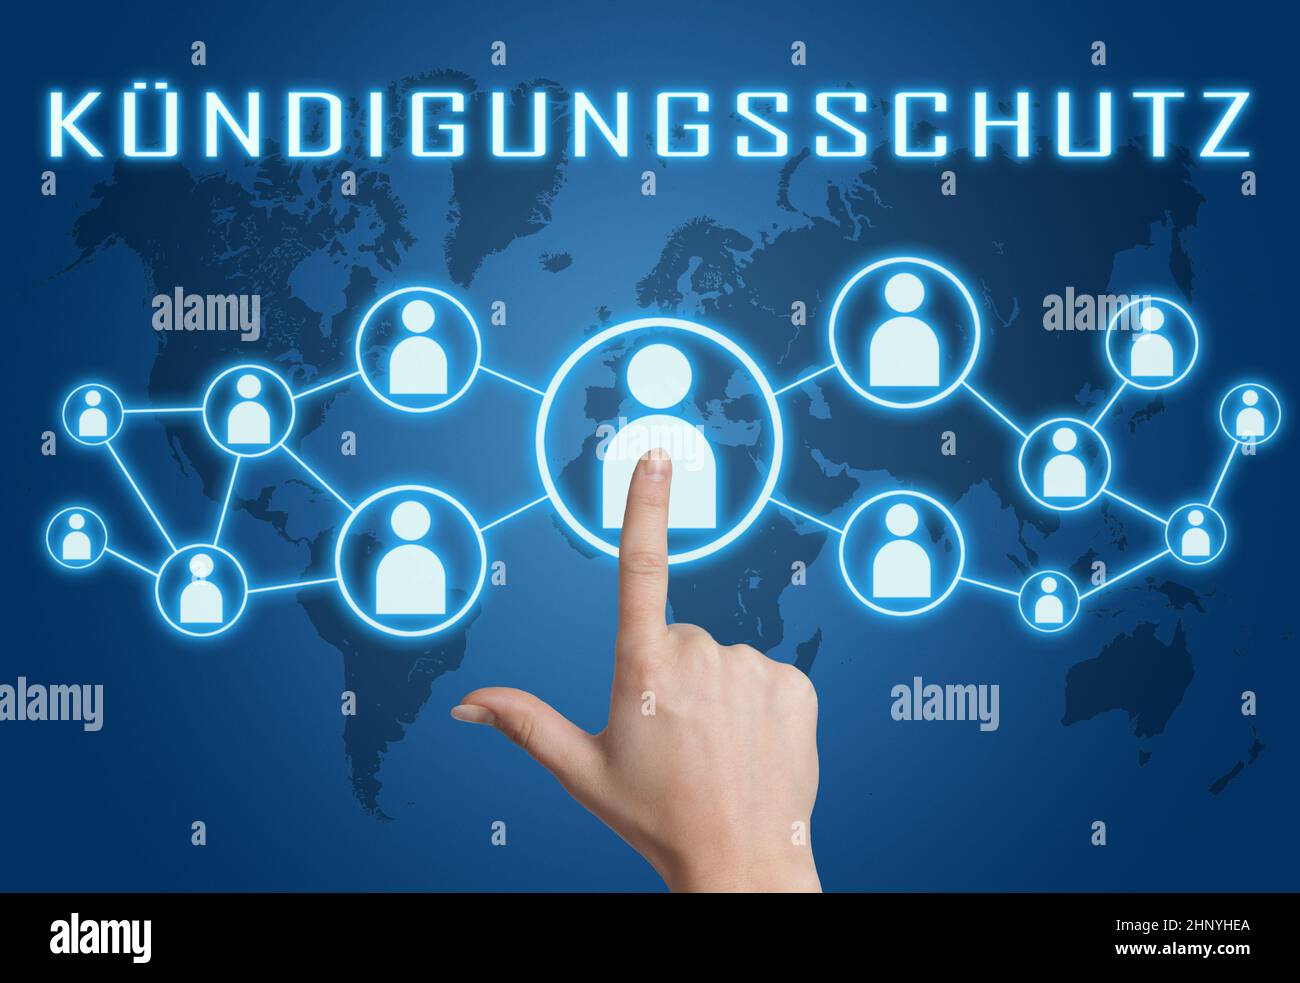 Kuendigungsschutz - german word for protection against dismissal - text concept with hand pressing social icons on blue world map background. Stock Photo